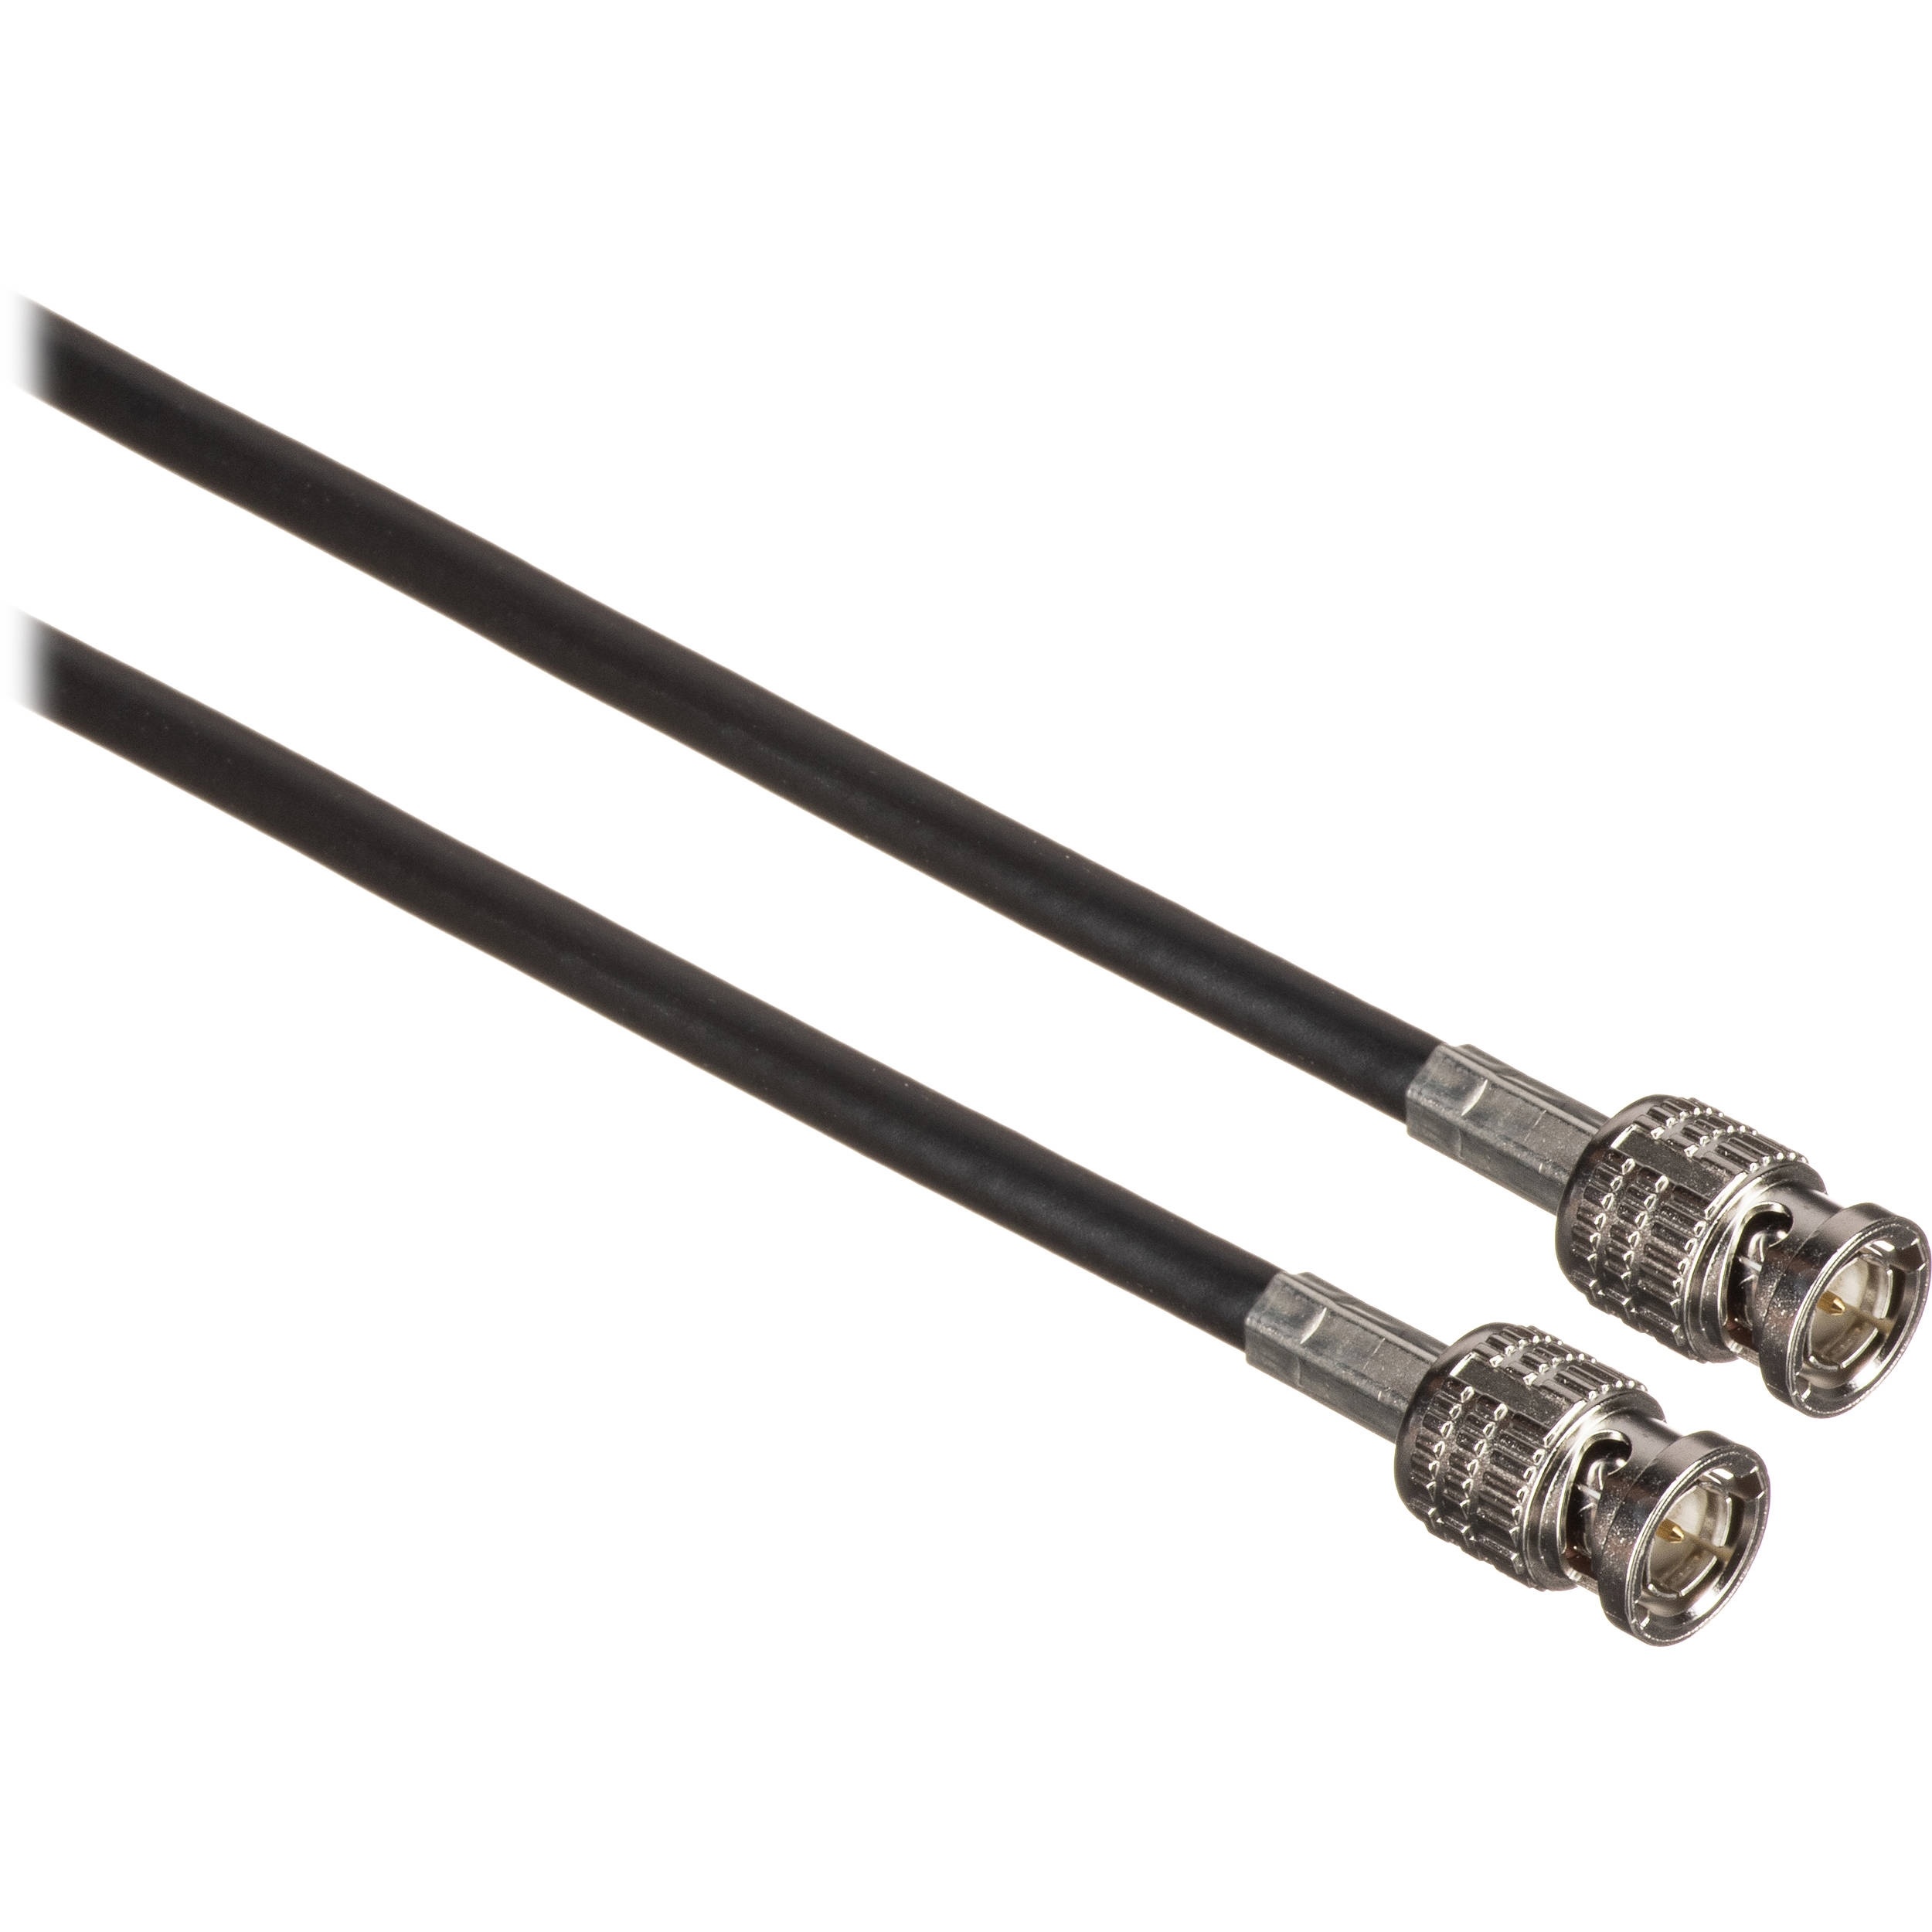 Canare HD-SDI Flexible Coaxial Cable with BNC Connectors (35' / 10.67 m)